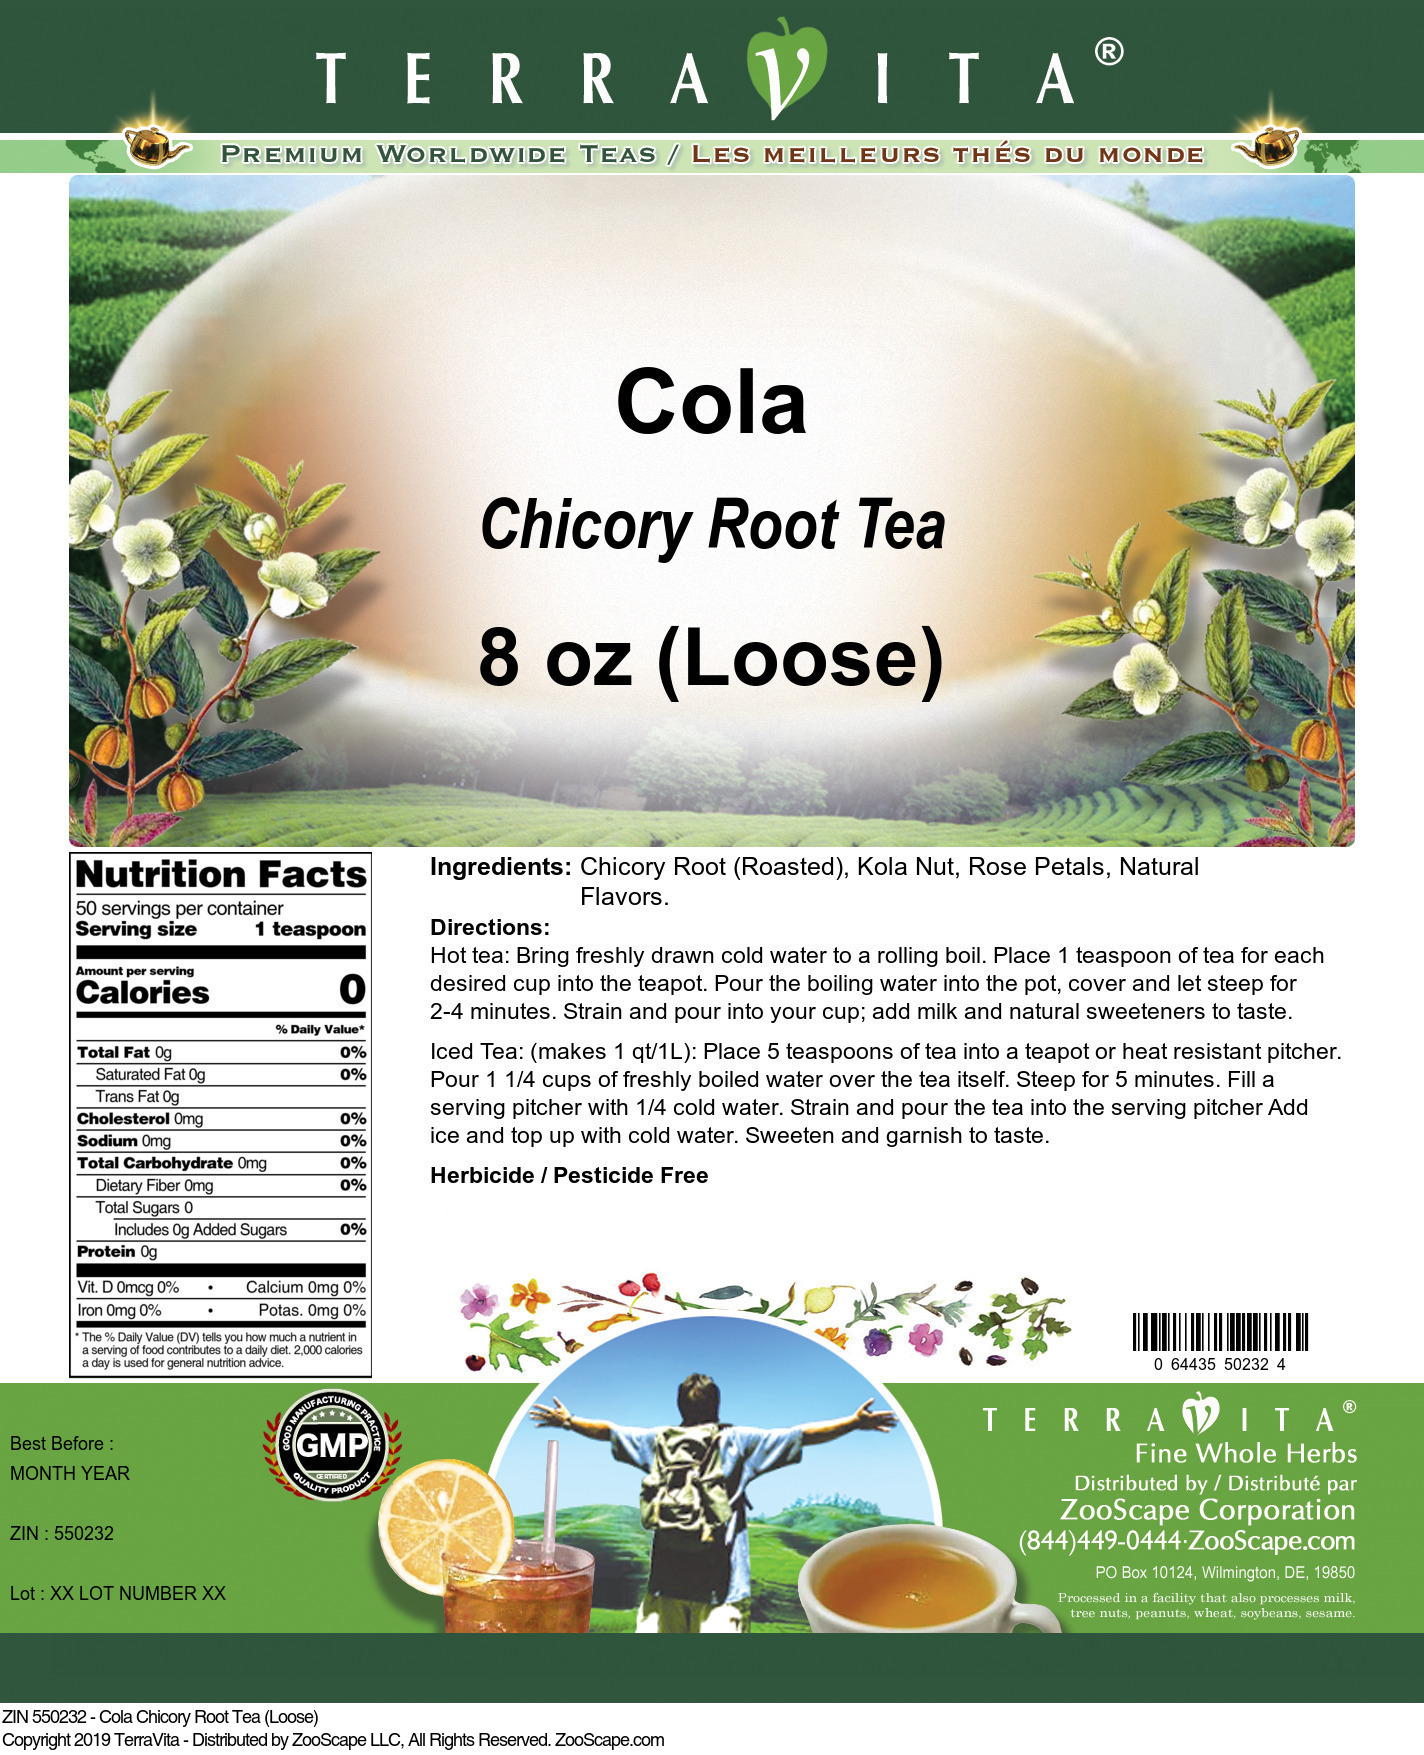 Cola Chicory Root Tea (Loose) - Label